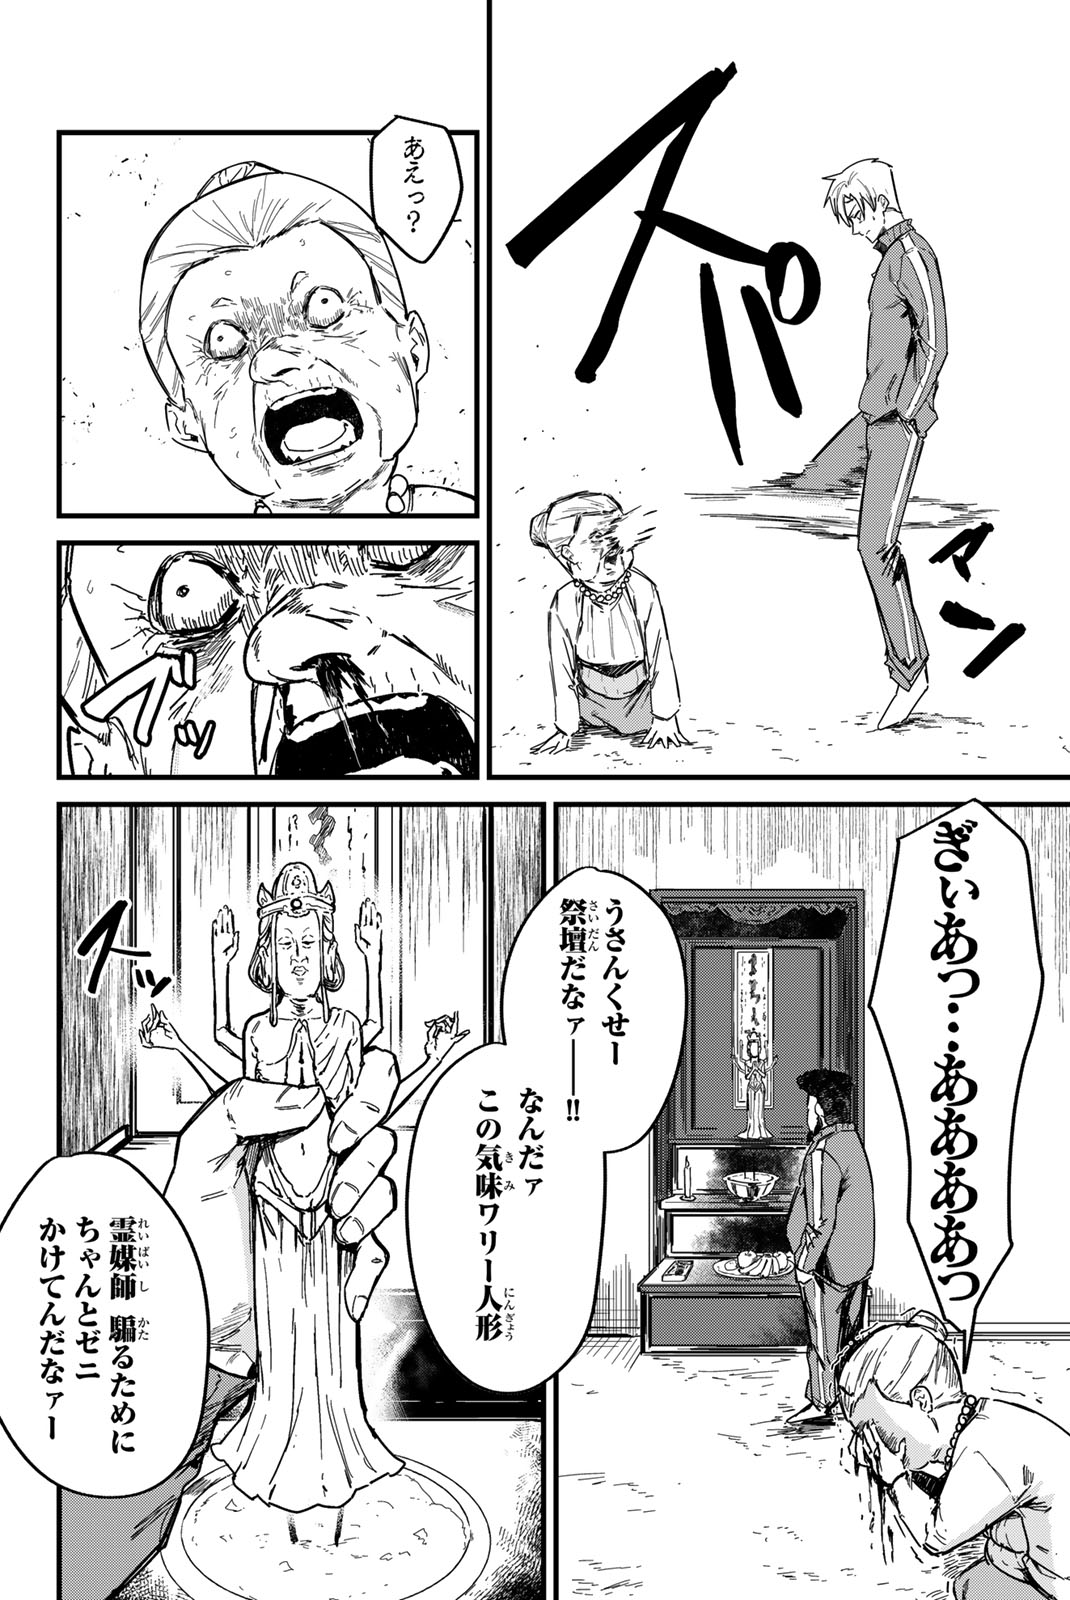 REDRUM 第1.1話 - Page 4